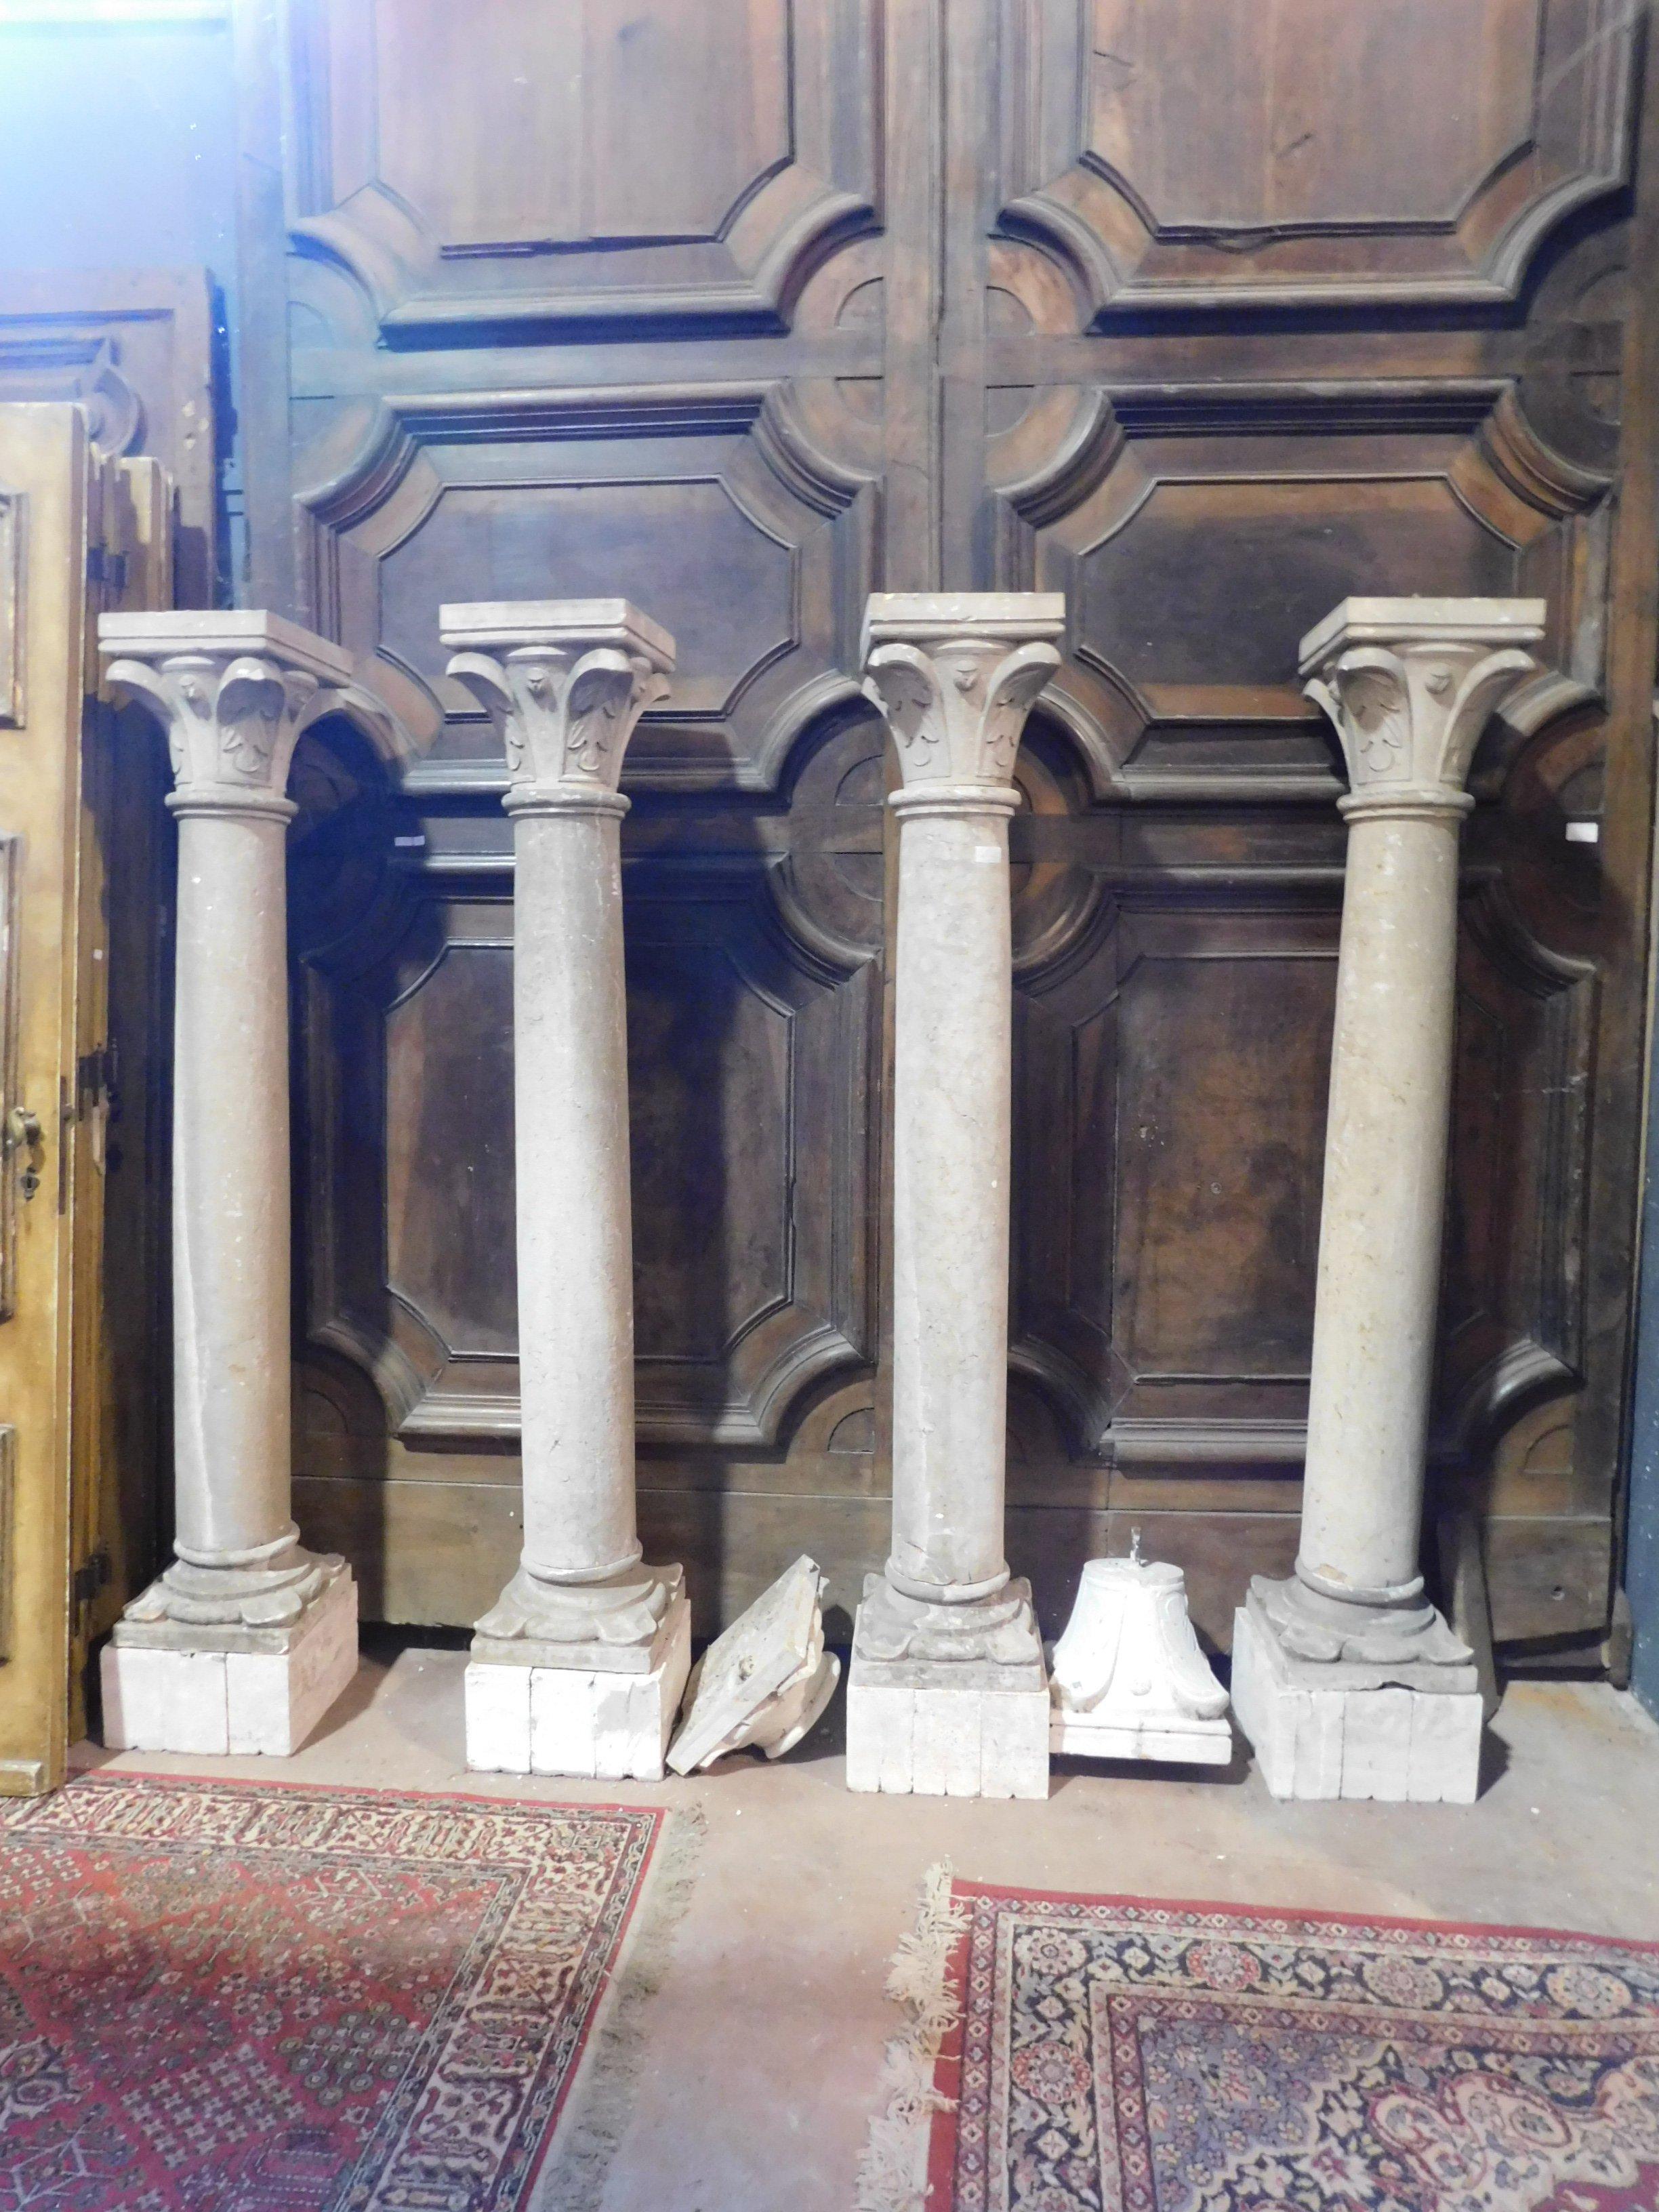 N. 4 Ancient columns in Botticino stone (typical Italian precious stone), with sculpted bases and capitals, white part not included, only for display, entirely hand-built in the second half of the 18th century, measuring 183 cm total height,
base